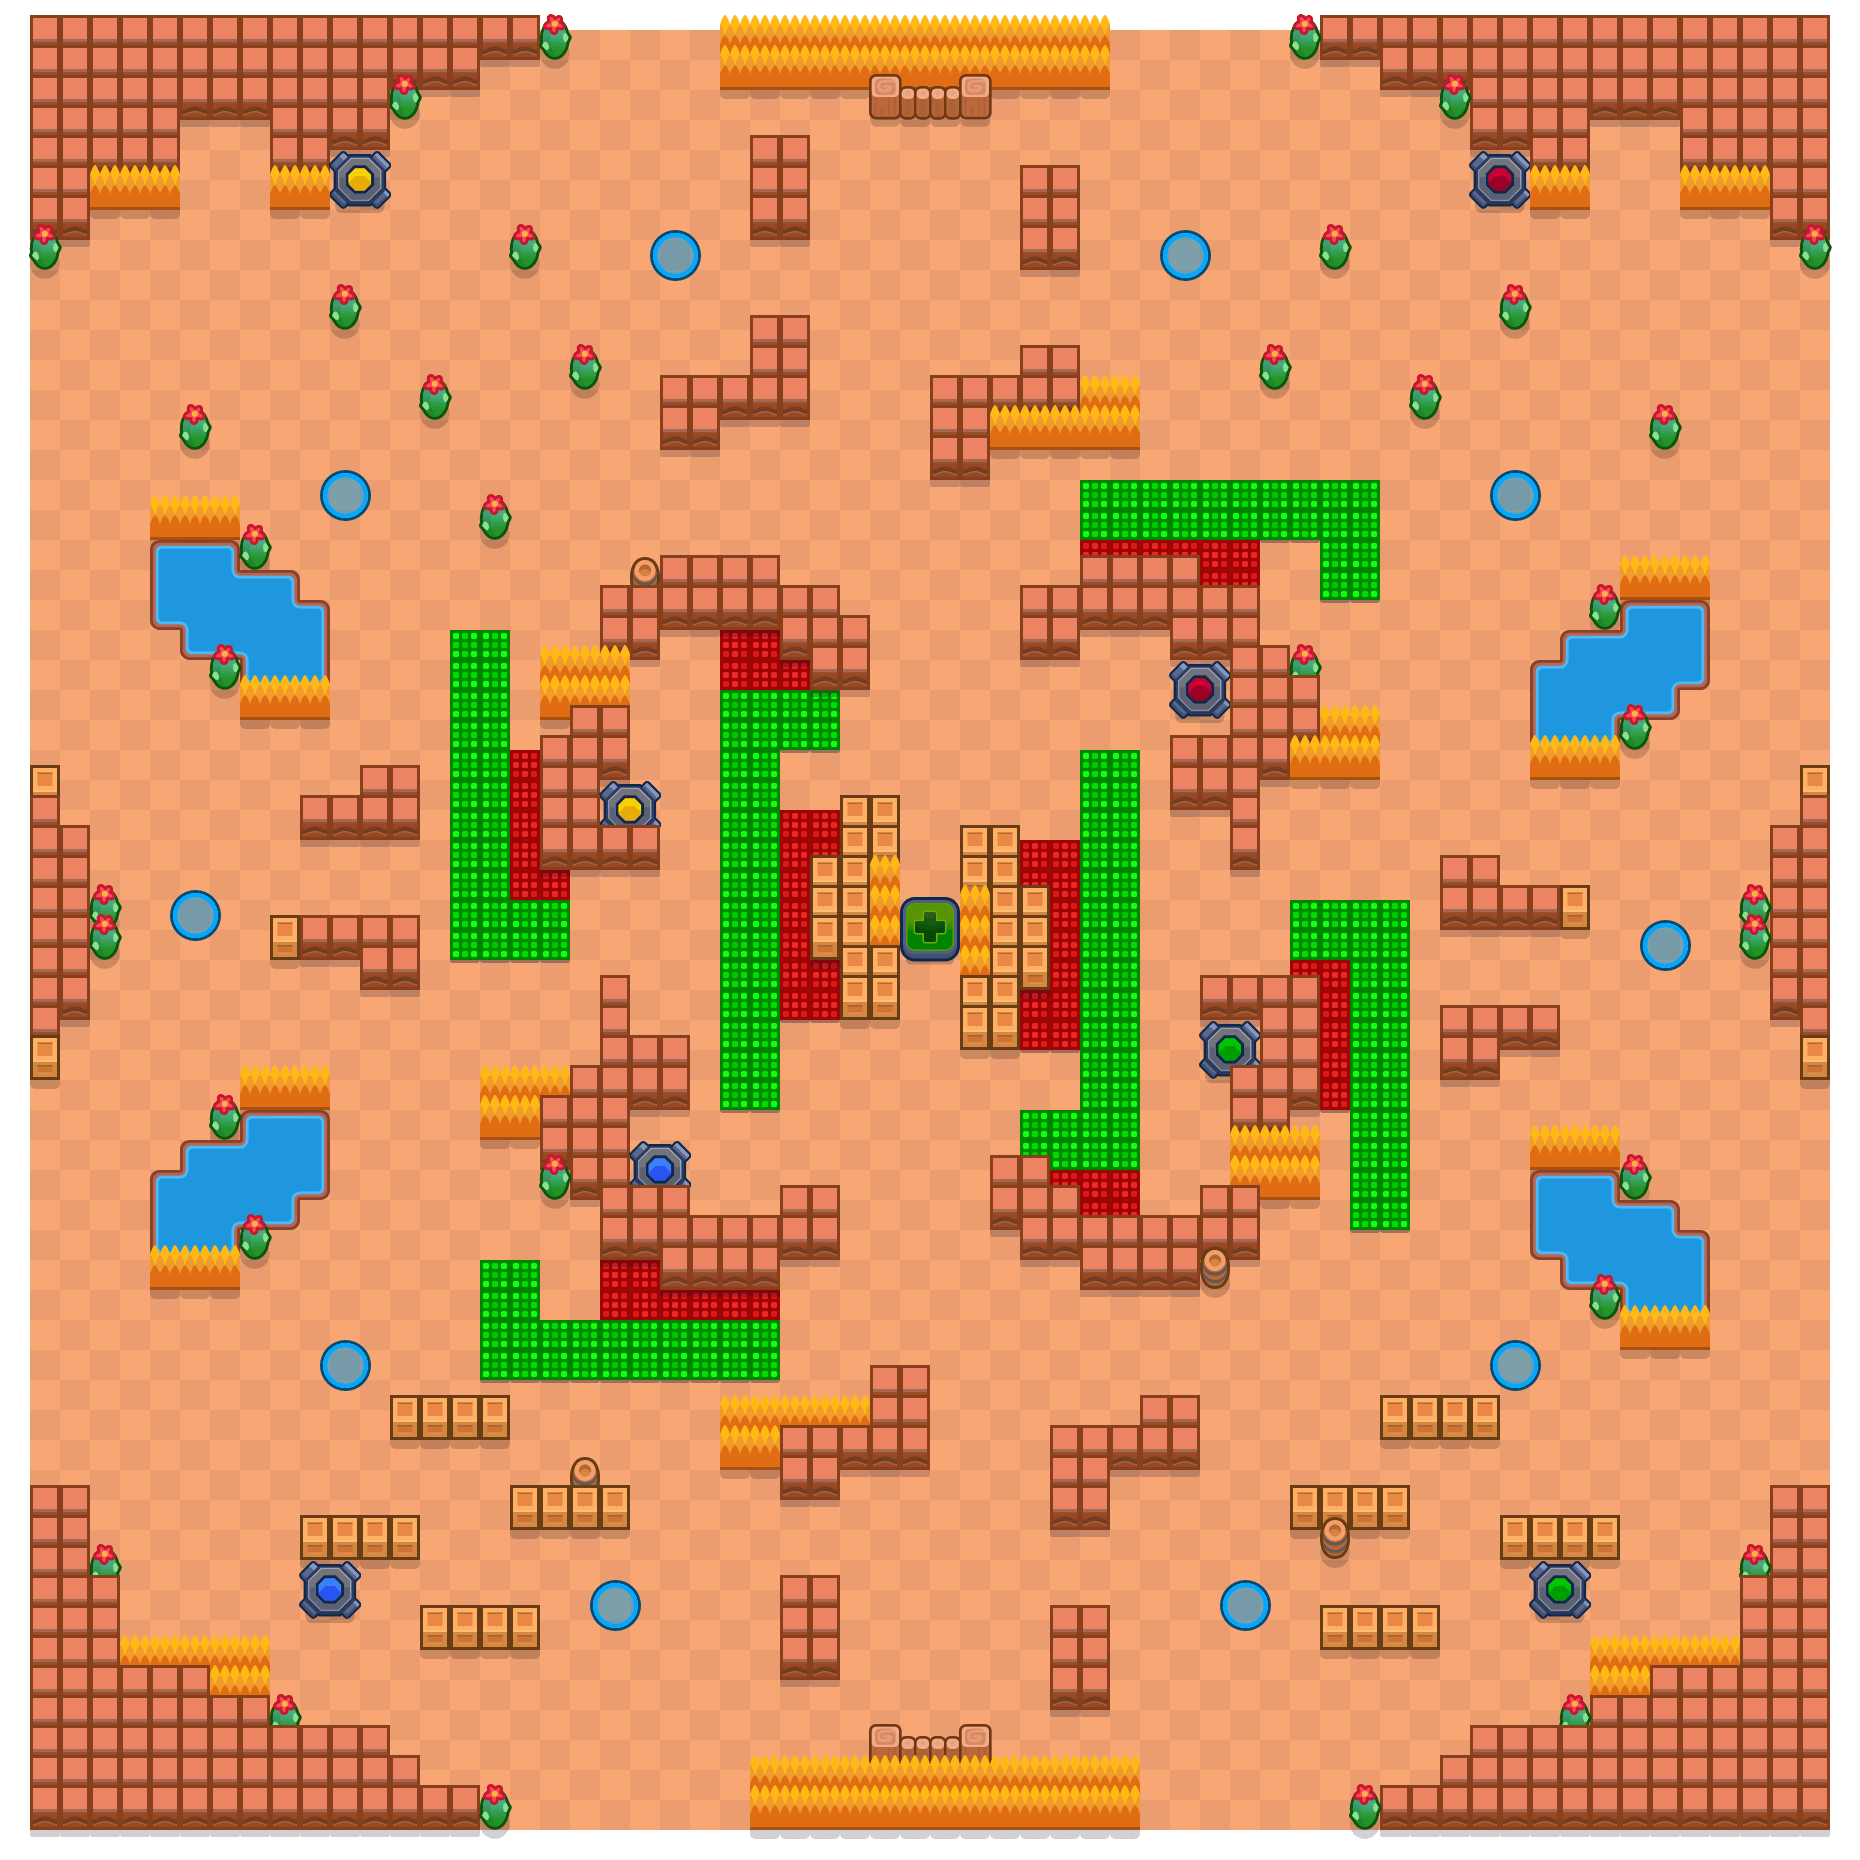 Befreiung is a Jäger Brawl Stars map. Check out Befreiung's map picture for Jäger and the best and recommended brawlers in Brawl Stars.